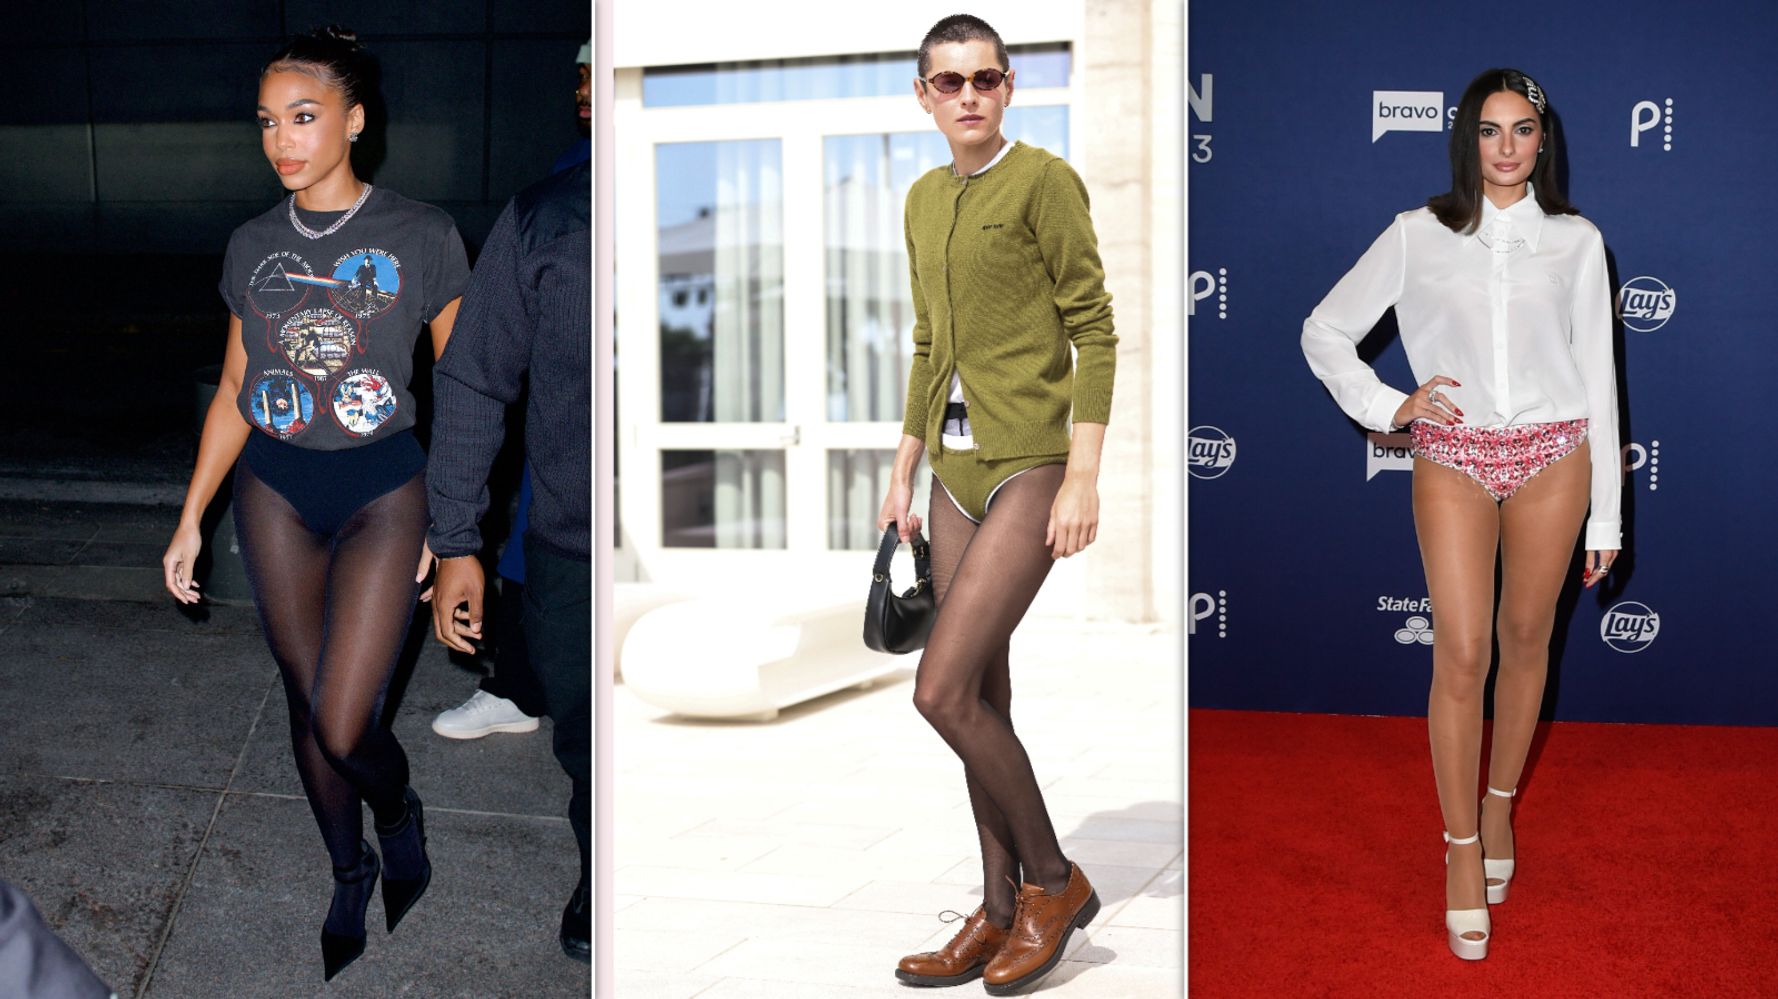 Granny Panties Fashion Trend: Celebs Are Wearing Them Without Pants